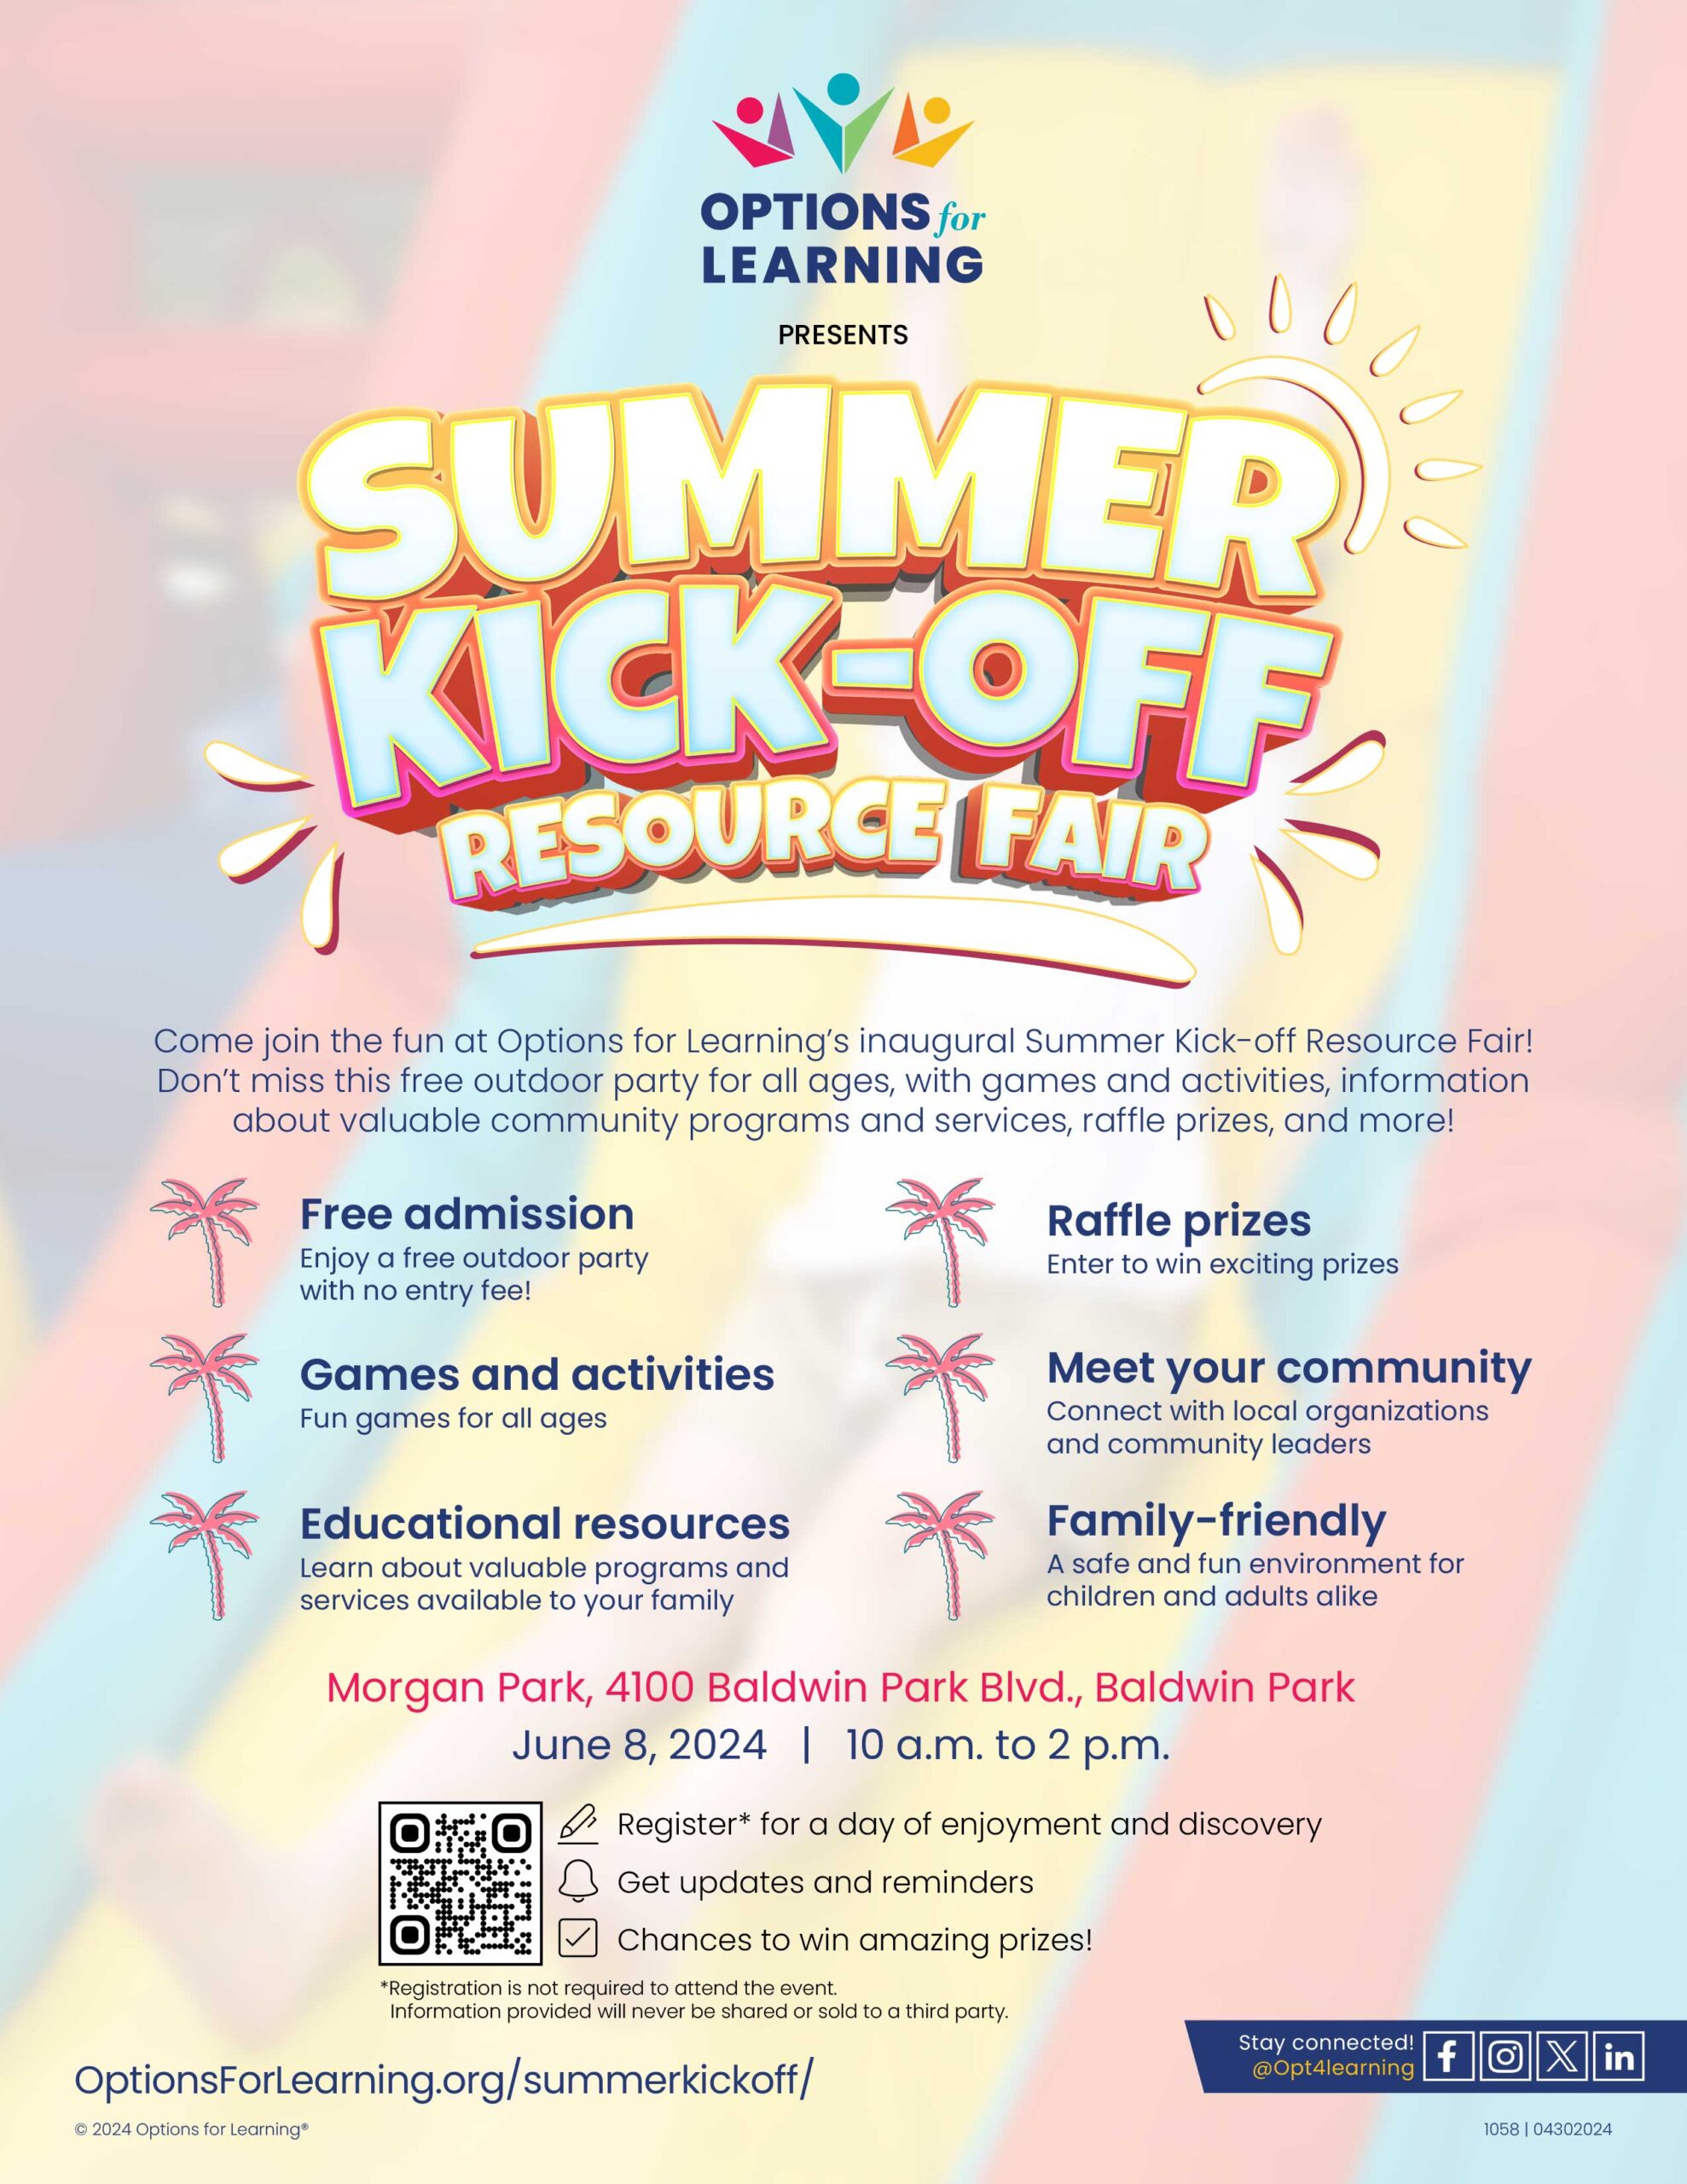 Options for Learning Summer Kickoff Resource Fair flyer in English